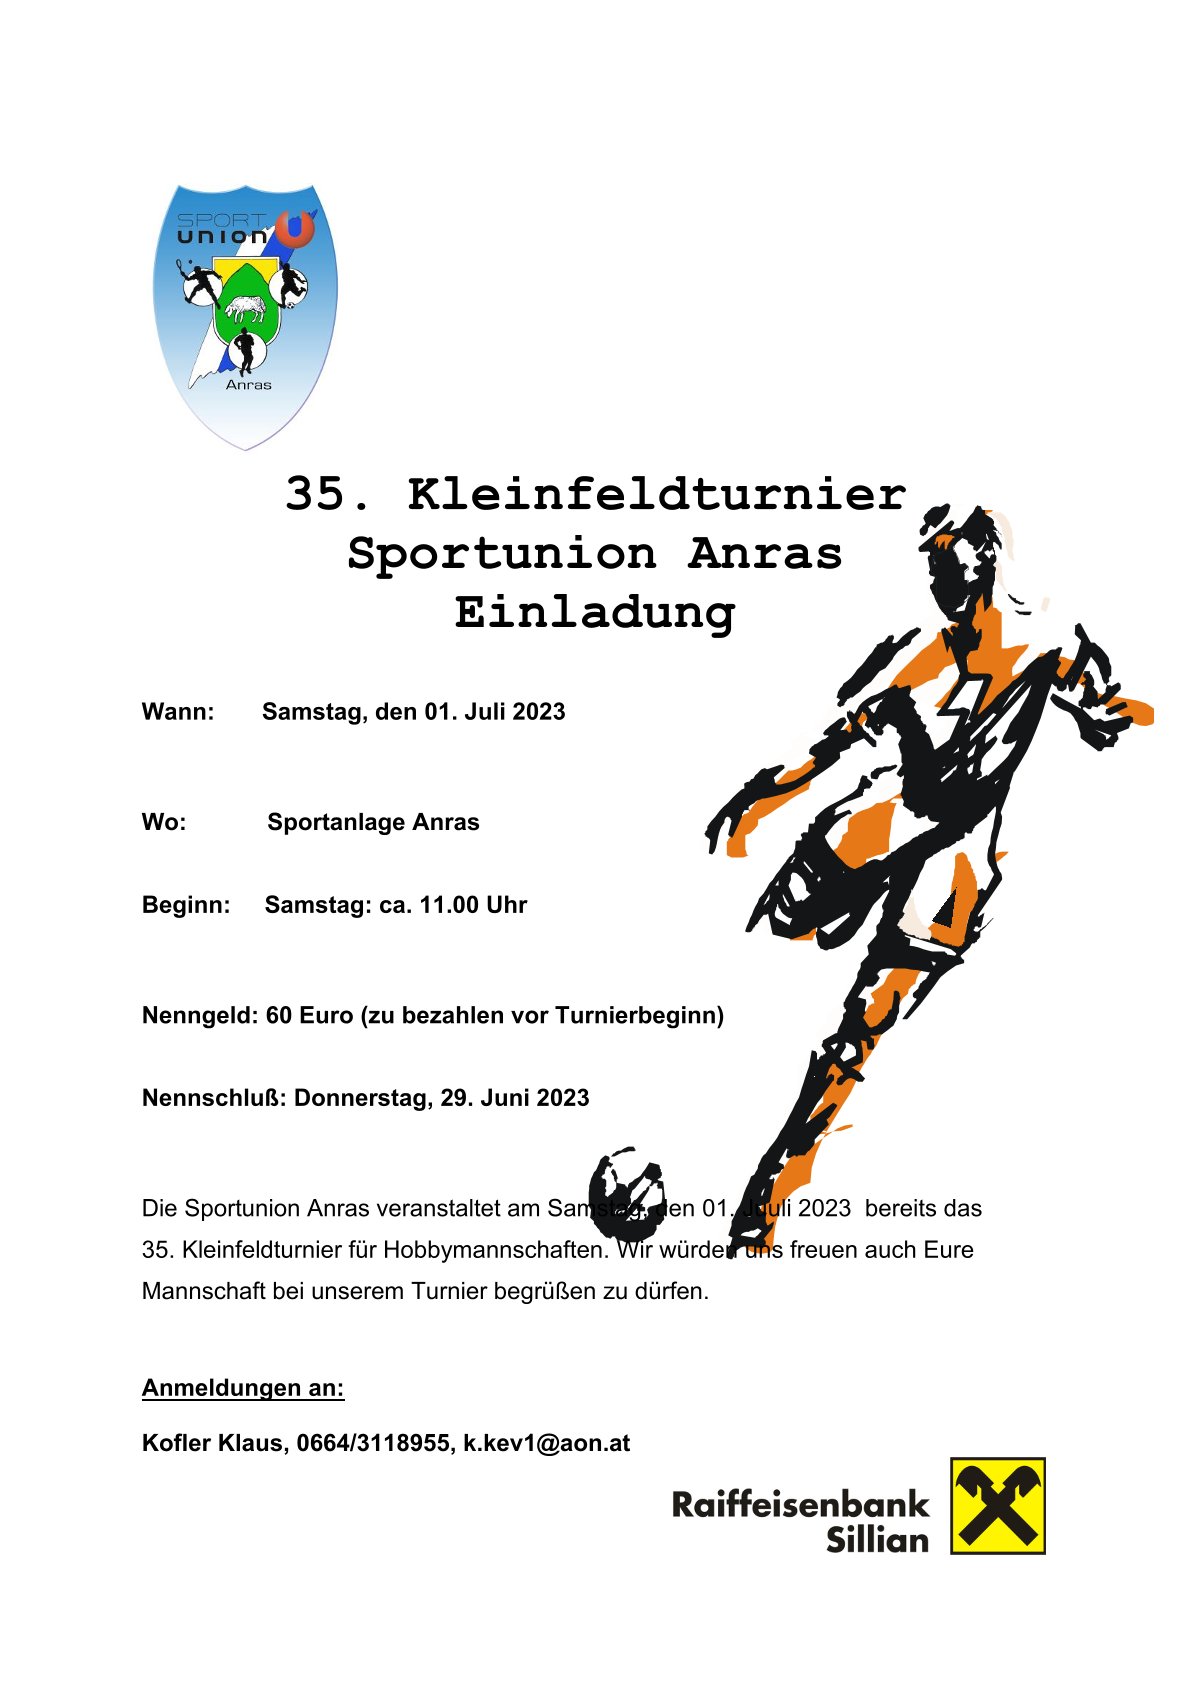 You are currently viewing 35. Kleinfeldturnier Sportunion Anras